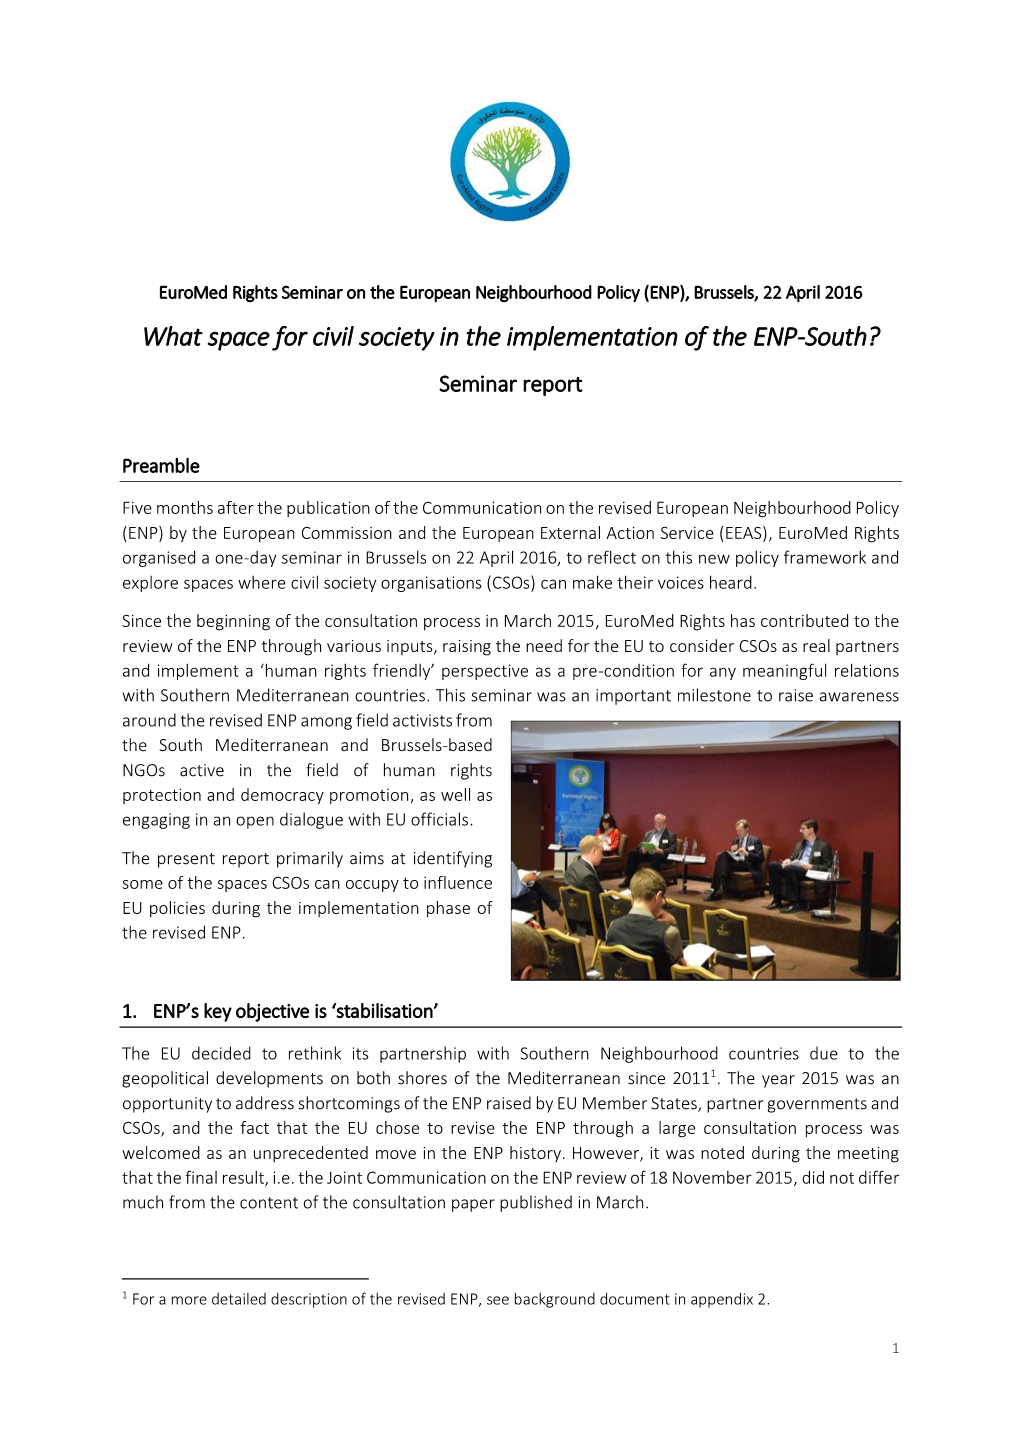 What Space for Civil Society in the Implementation of the ENP-South? Seminar Report